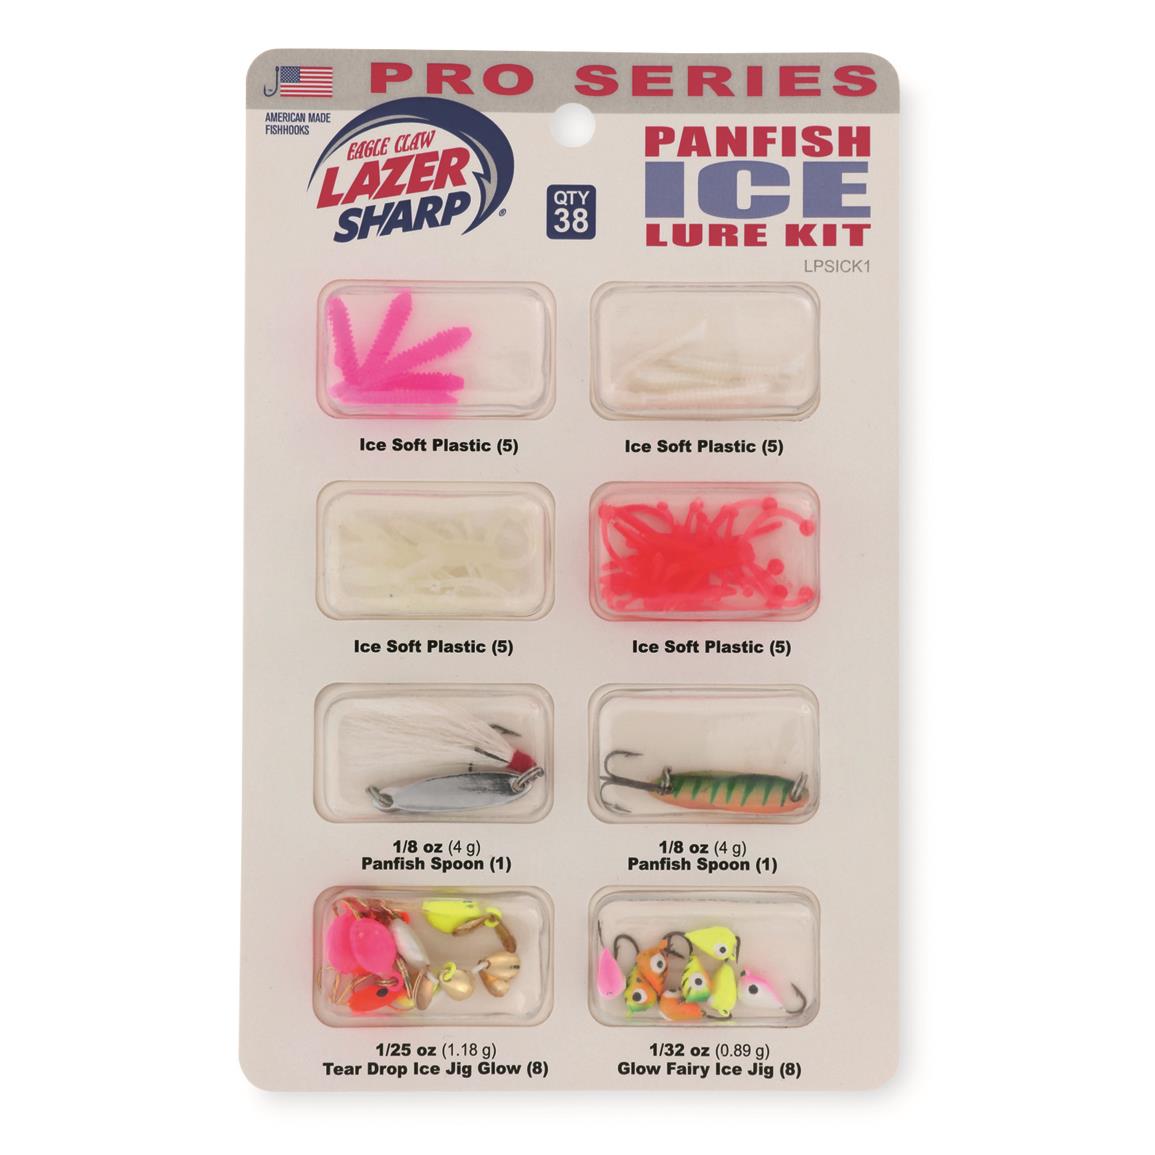 Eagle Claw Pro Series Panfish Ice Lure Kit, 38 Piece